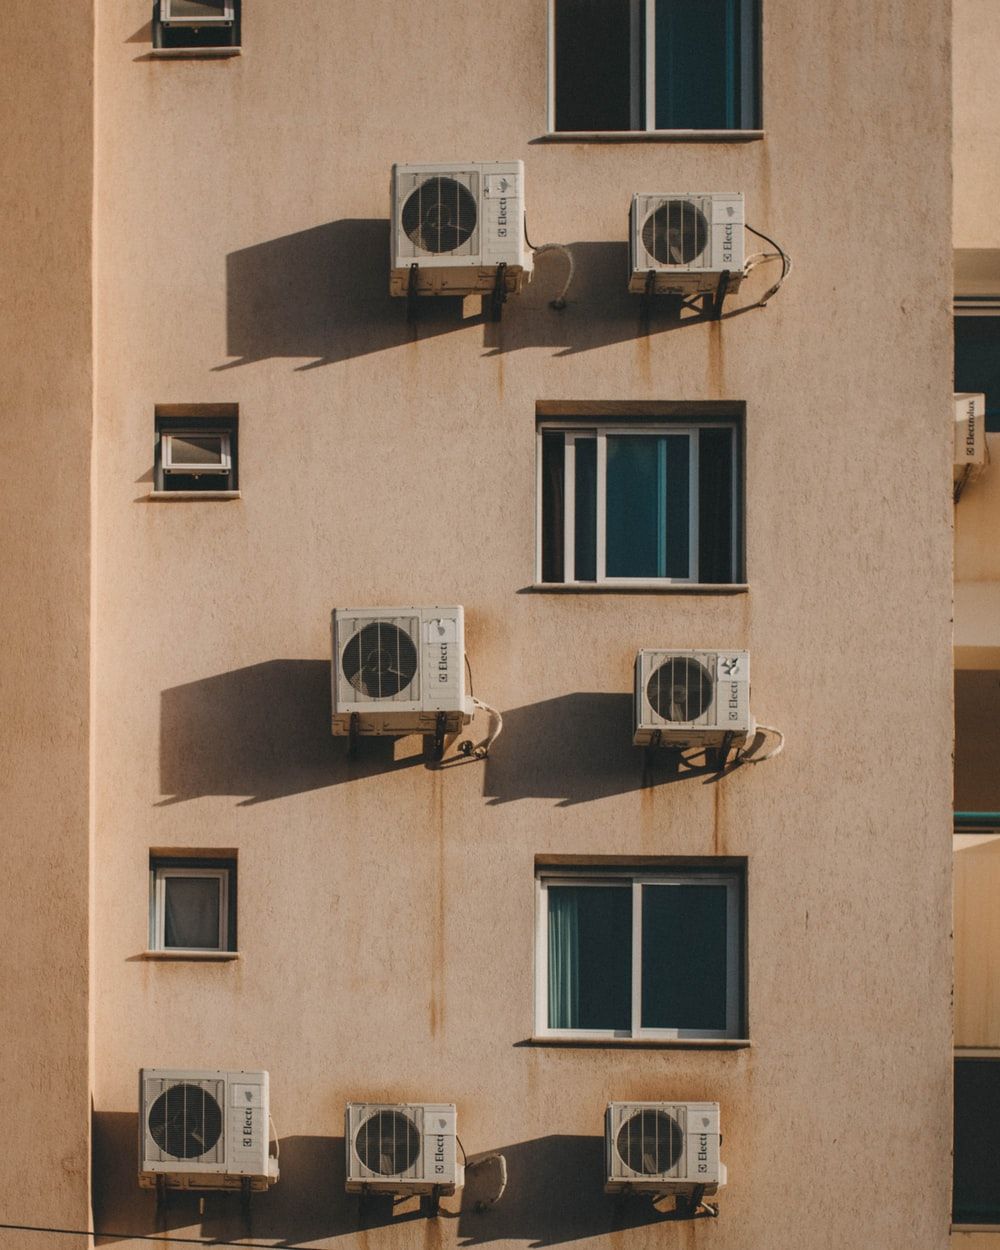 Air Conditioner Picture. Download Free Image